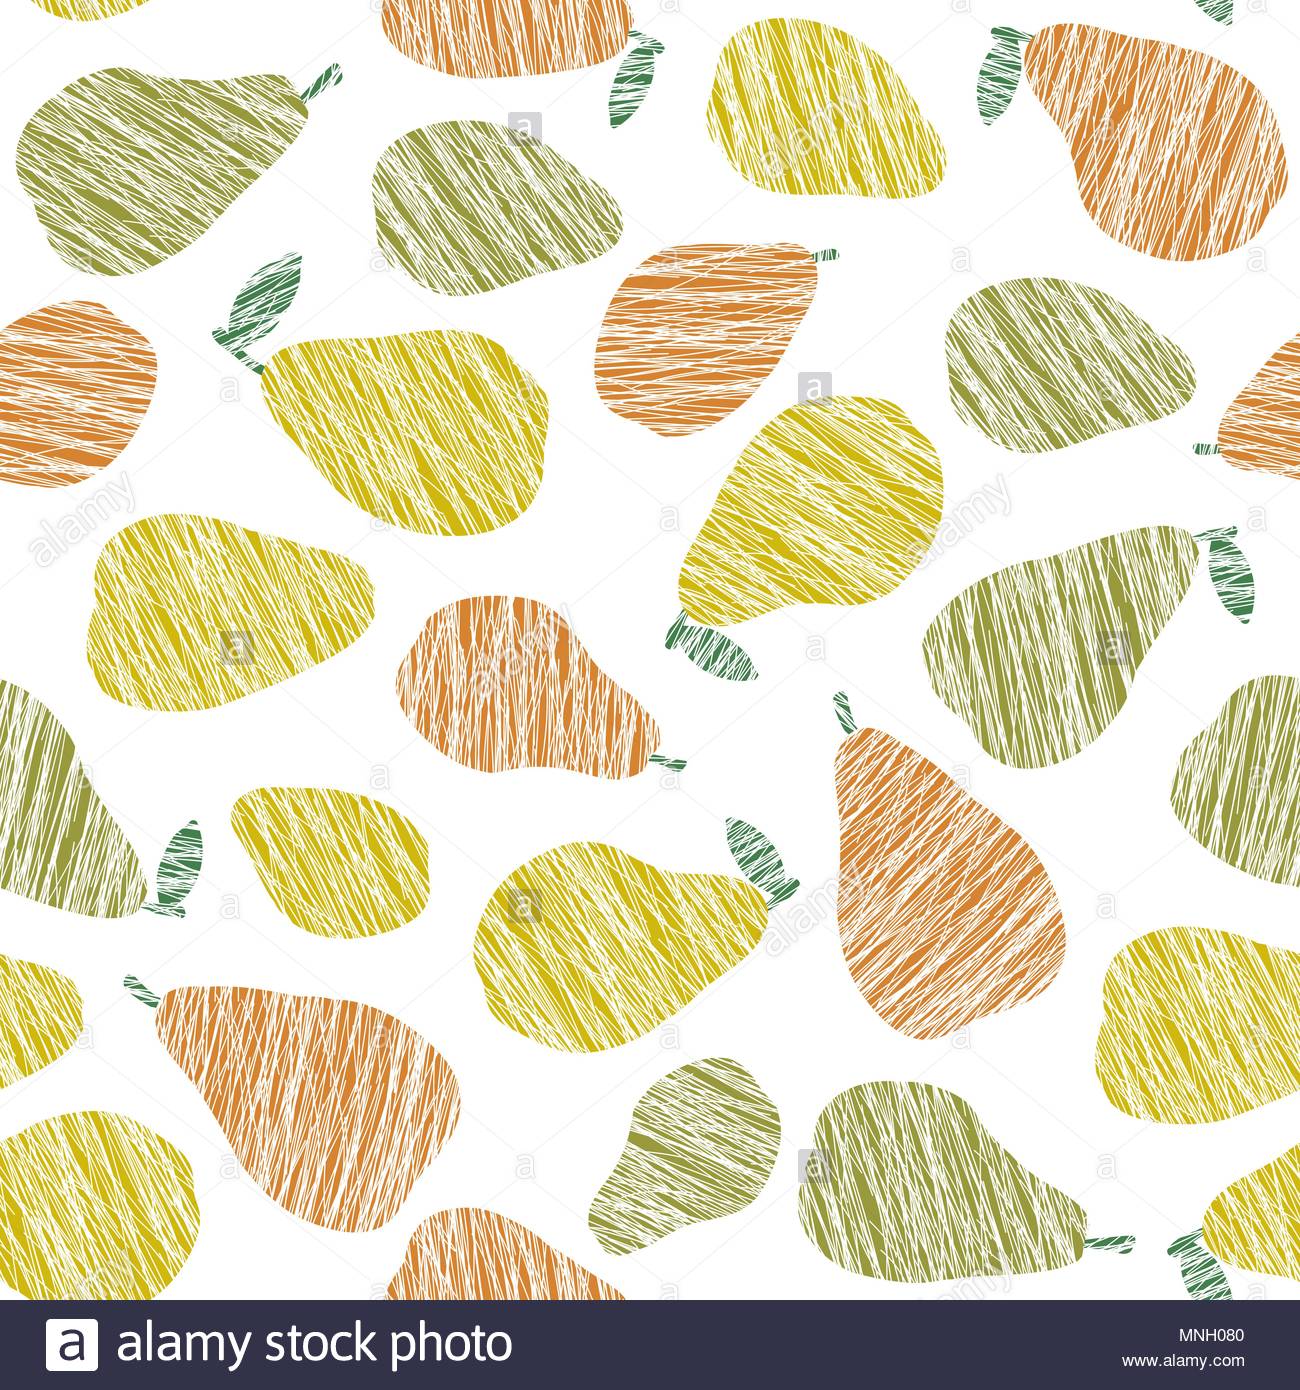 Colorful Pear Pattern Summer Harvest Background Seamless Image